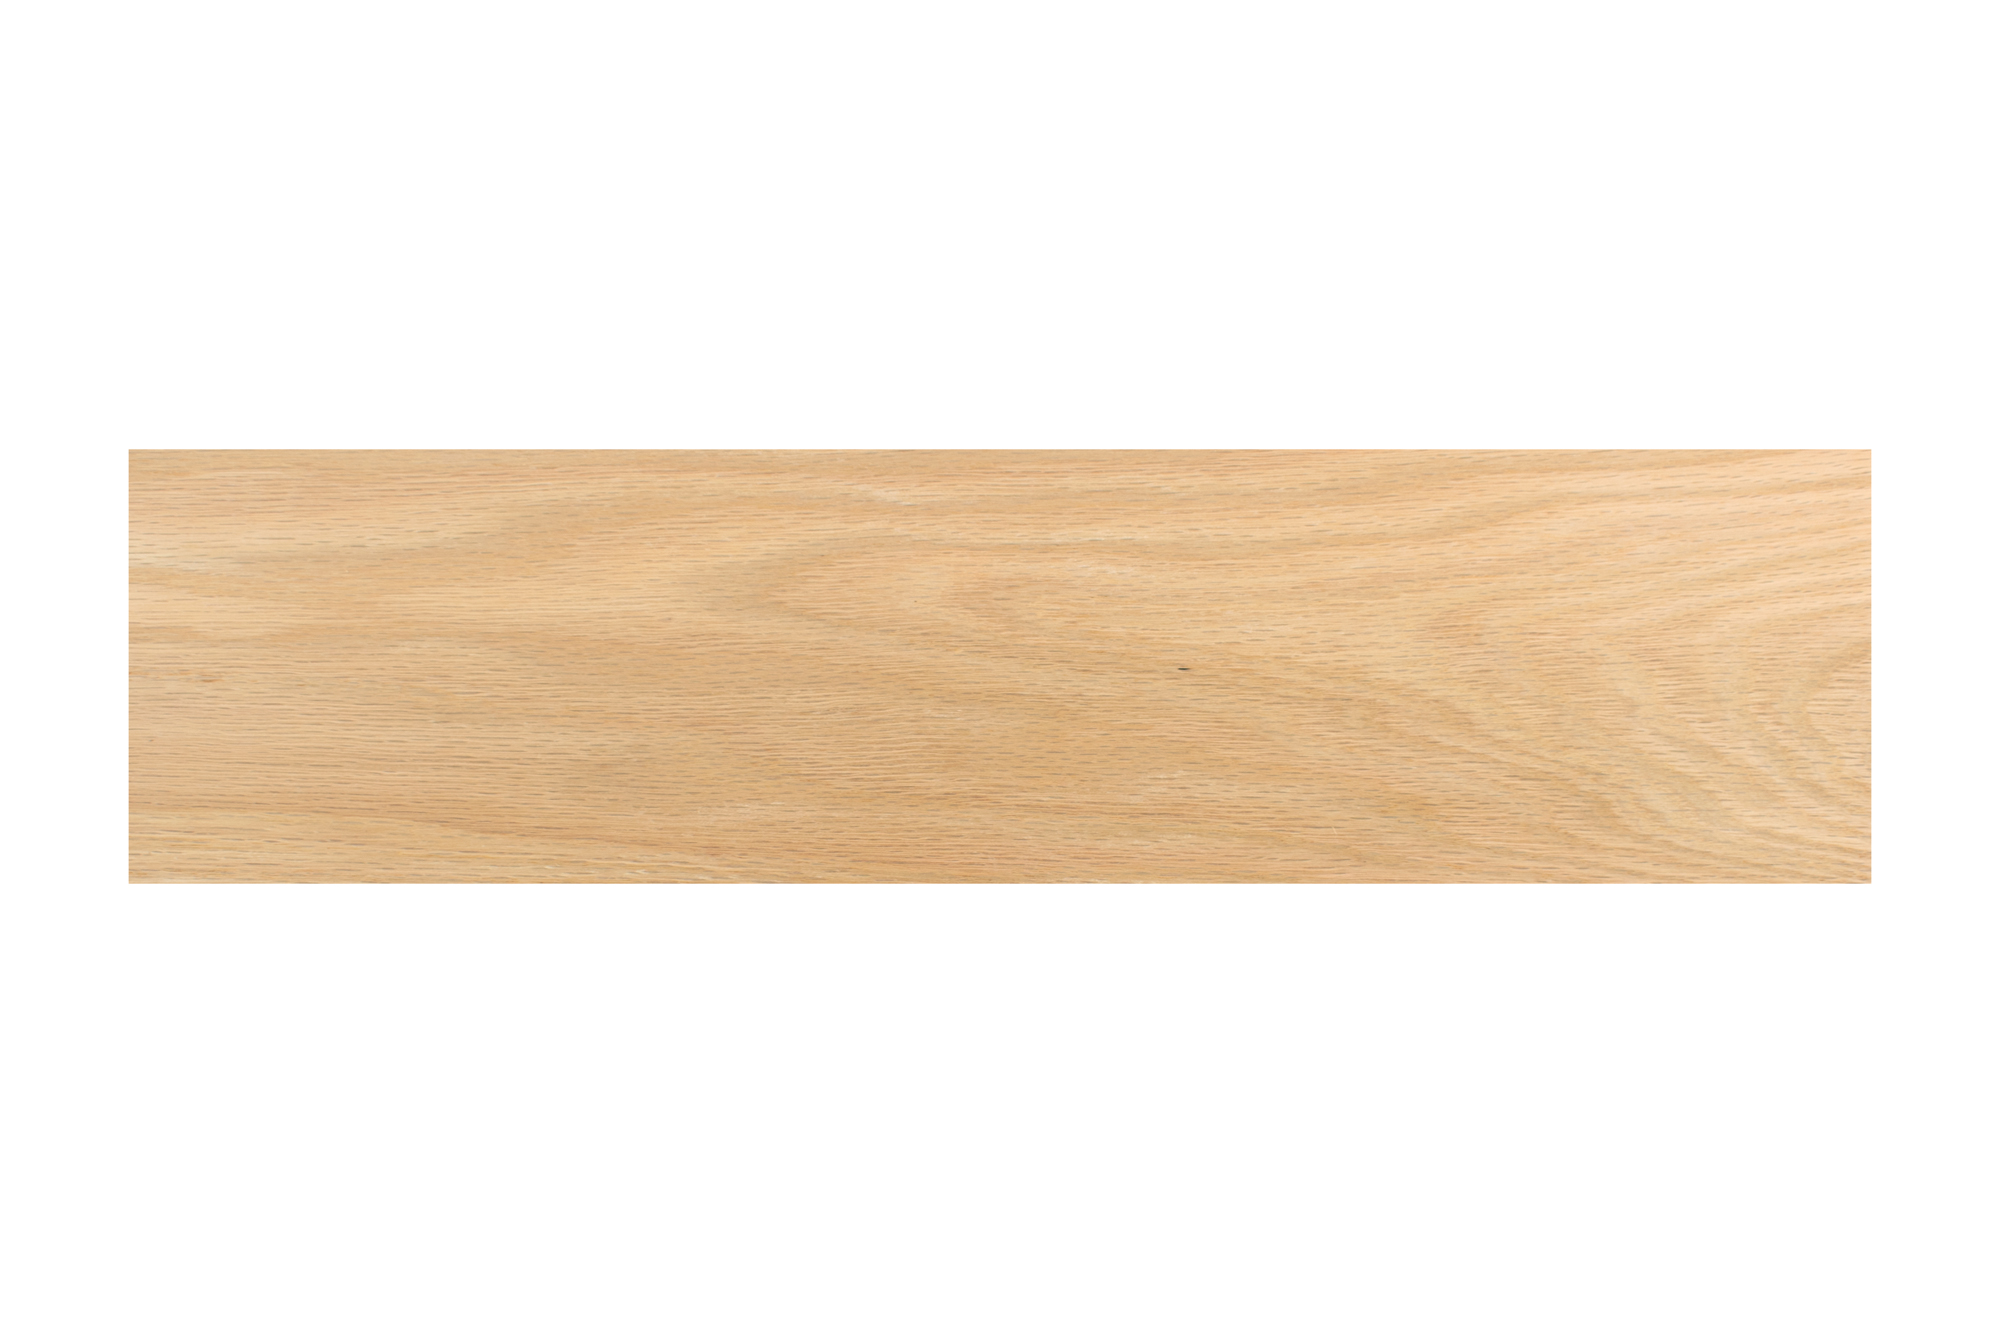 Wood craft board 1/4 inch thick